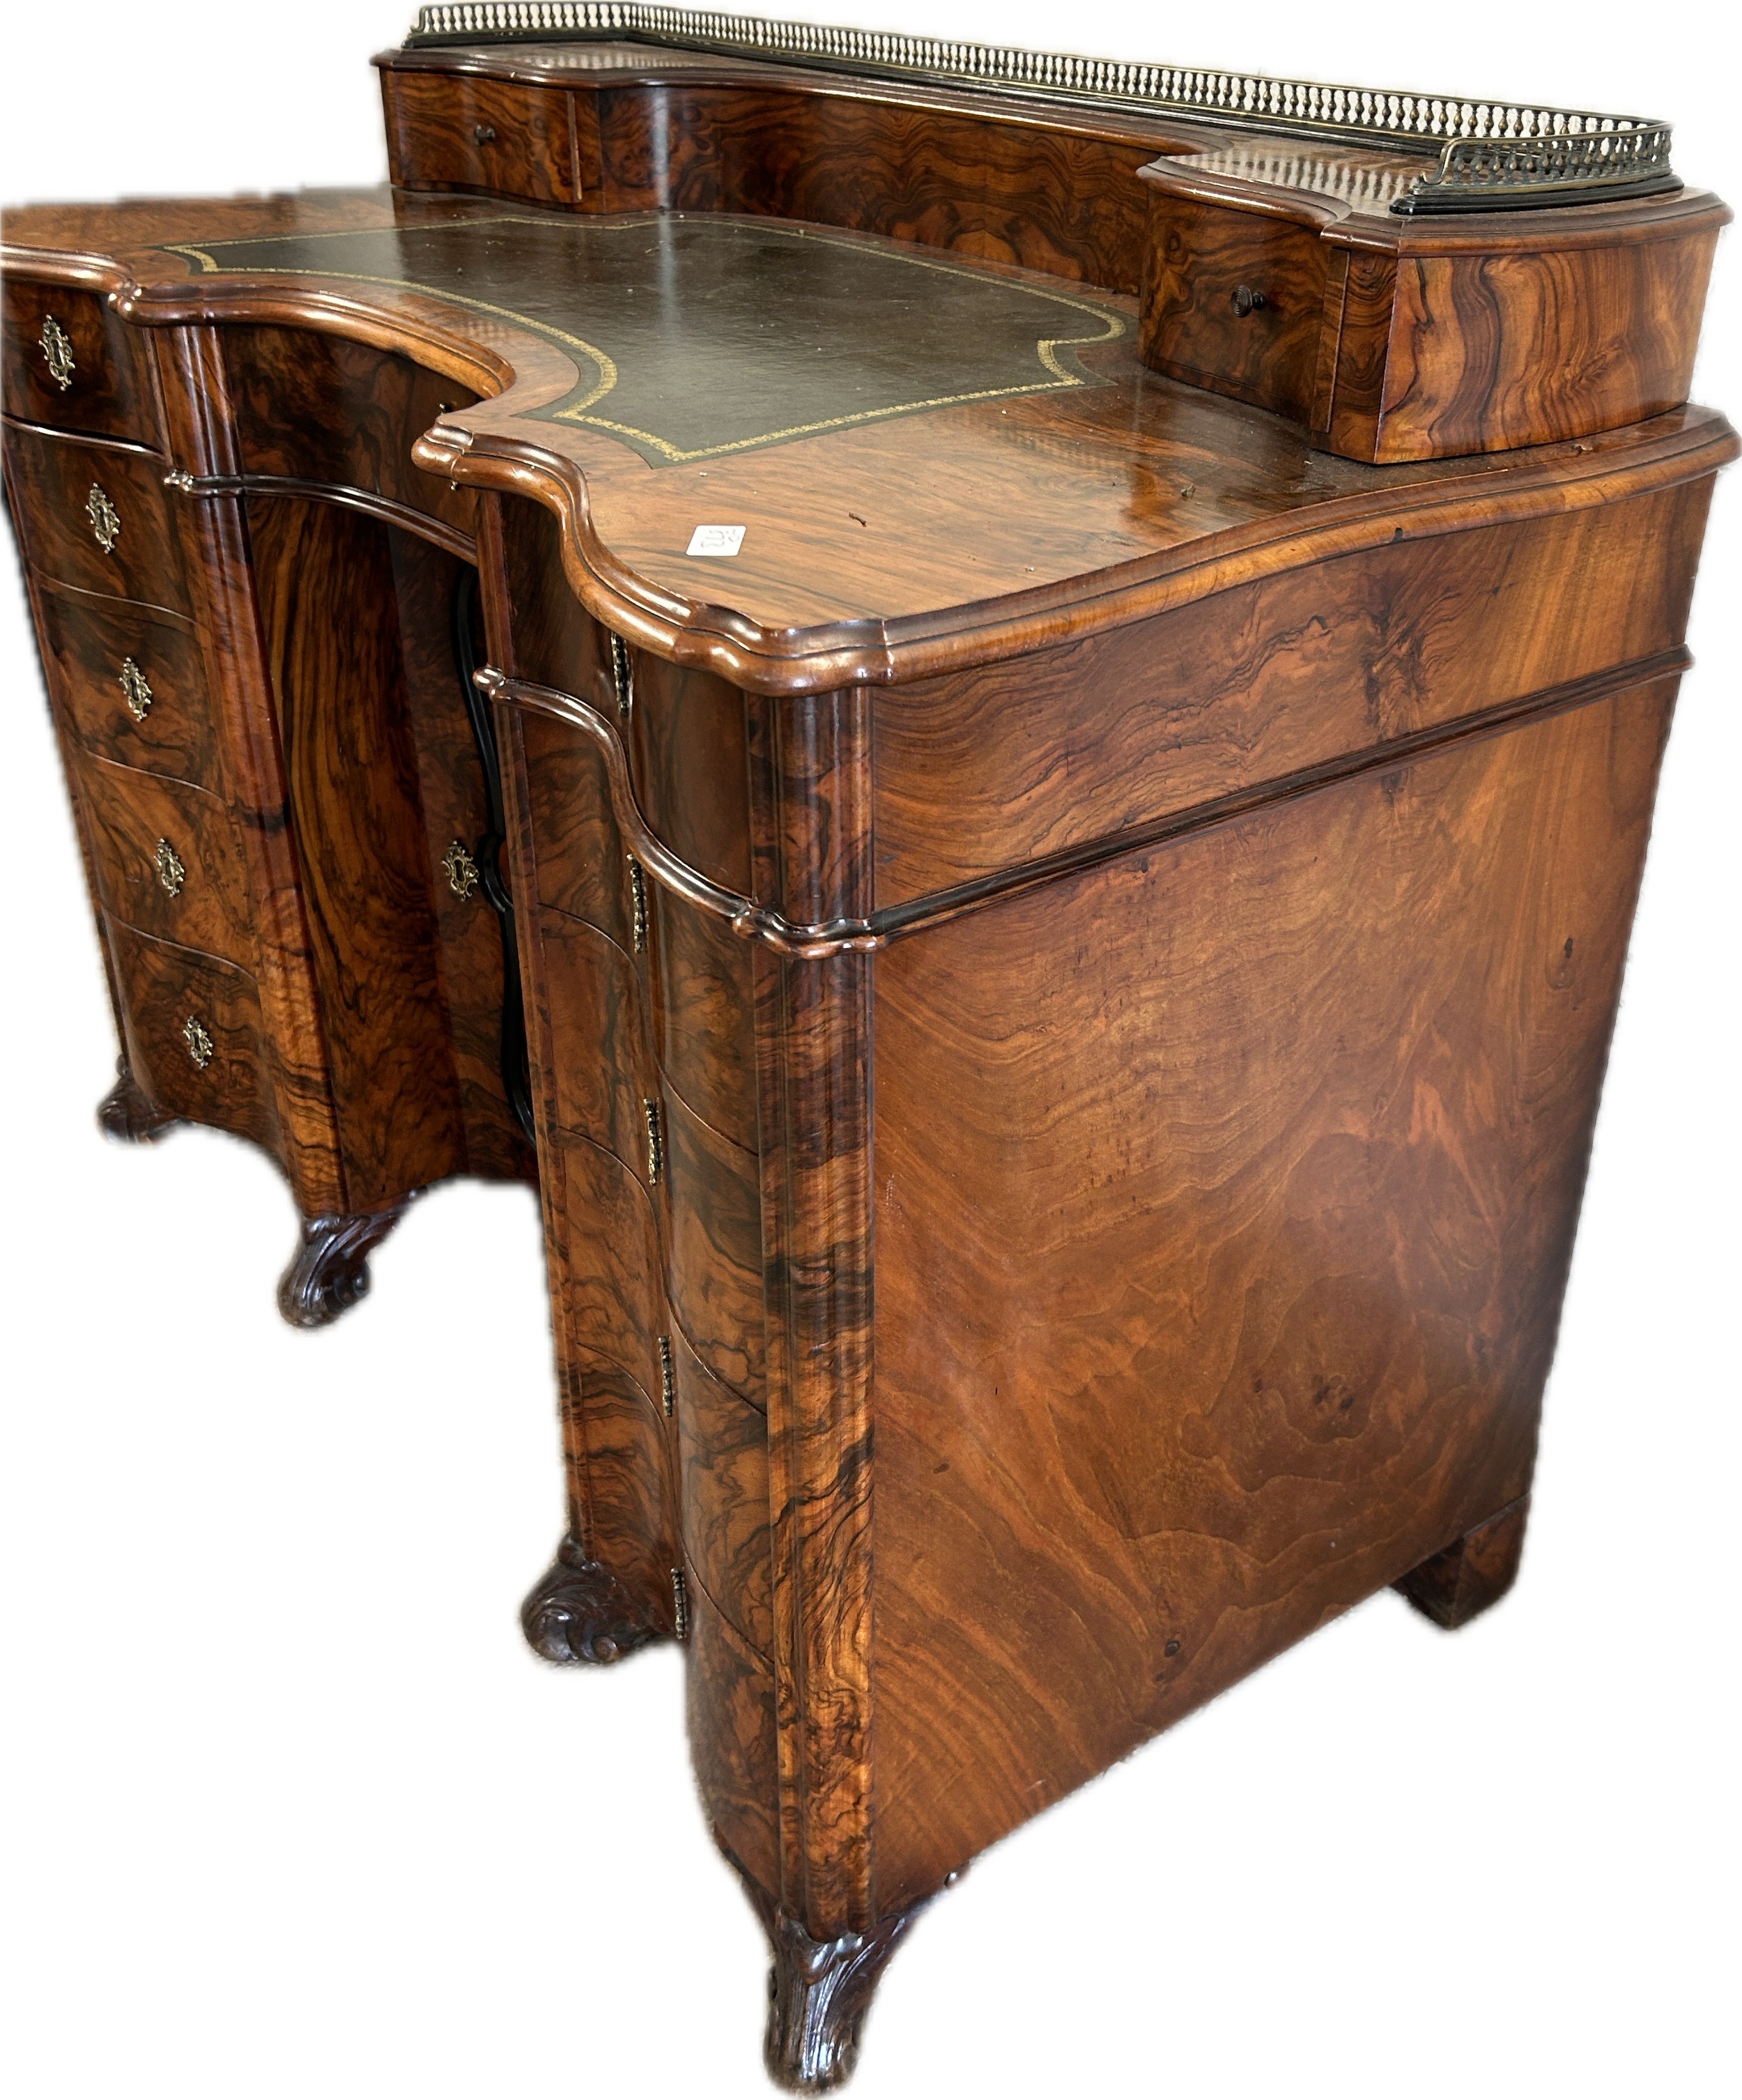 Reproduction of a 19th century Victorian walnut desk - Image 2 of 4